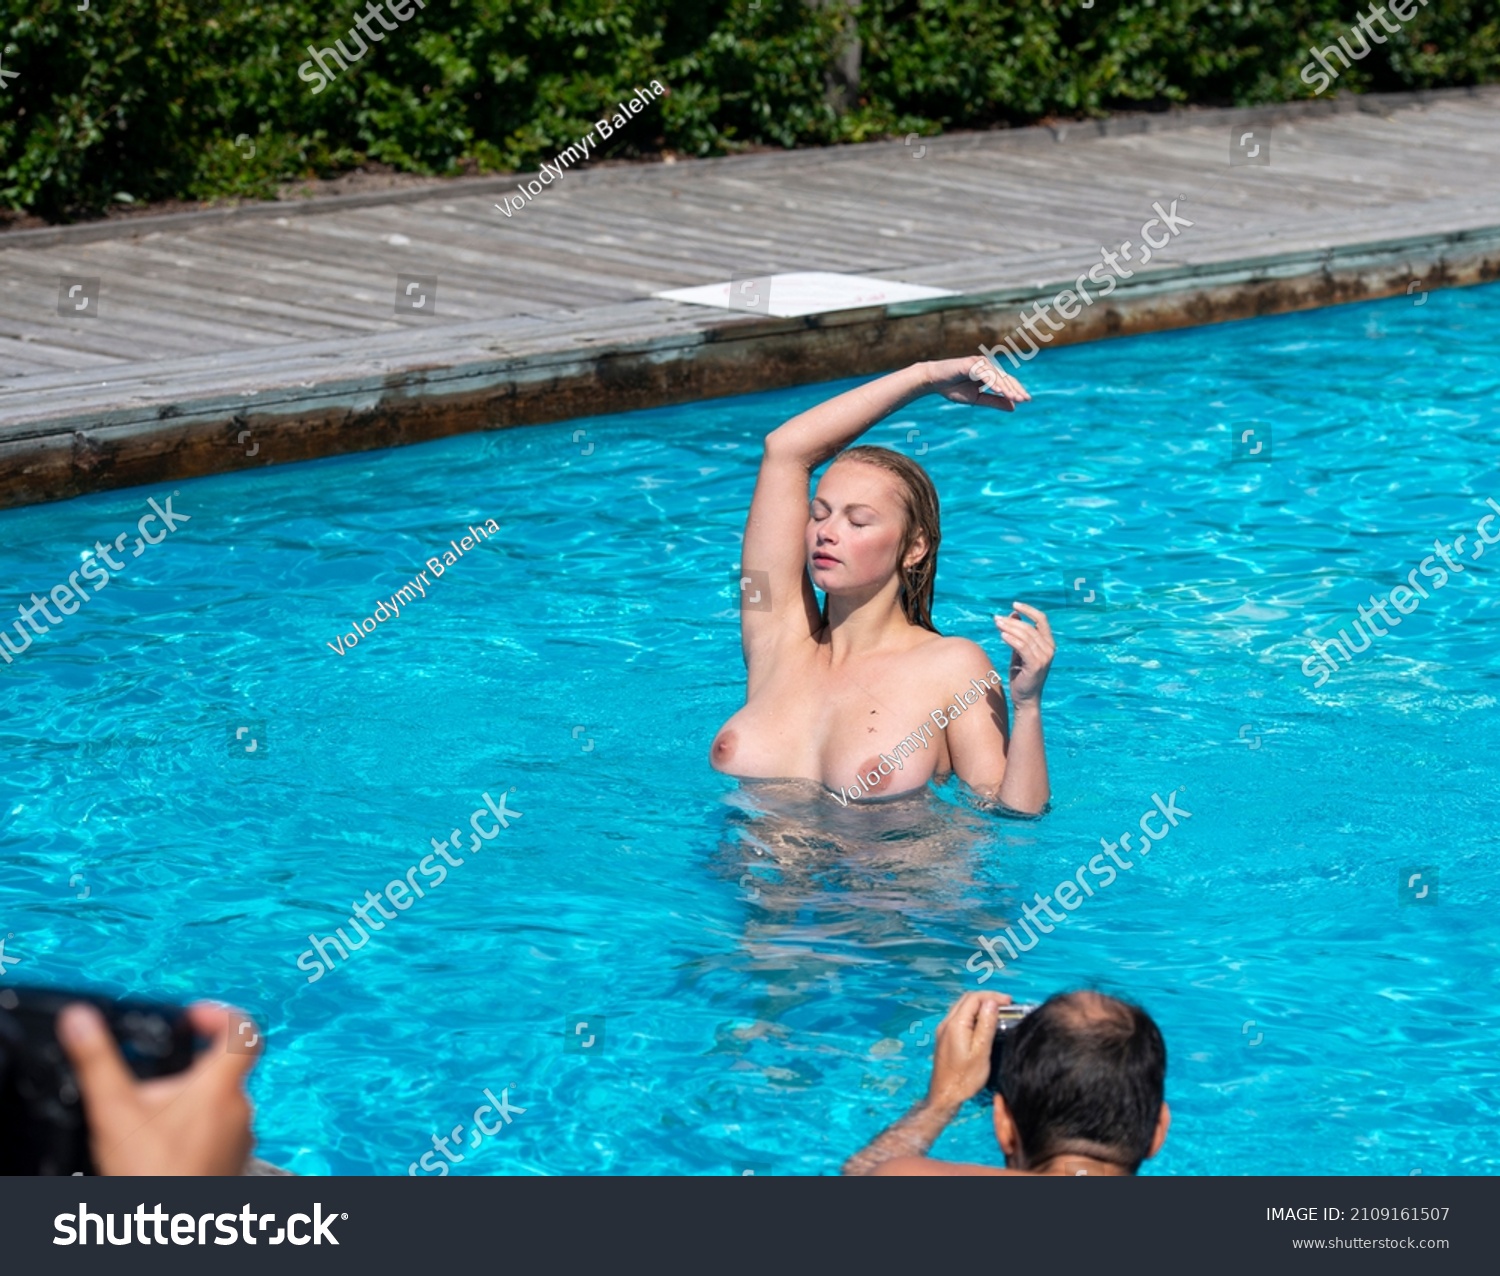 Naked In The Pool